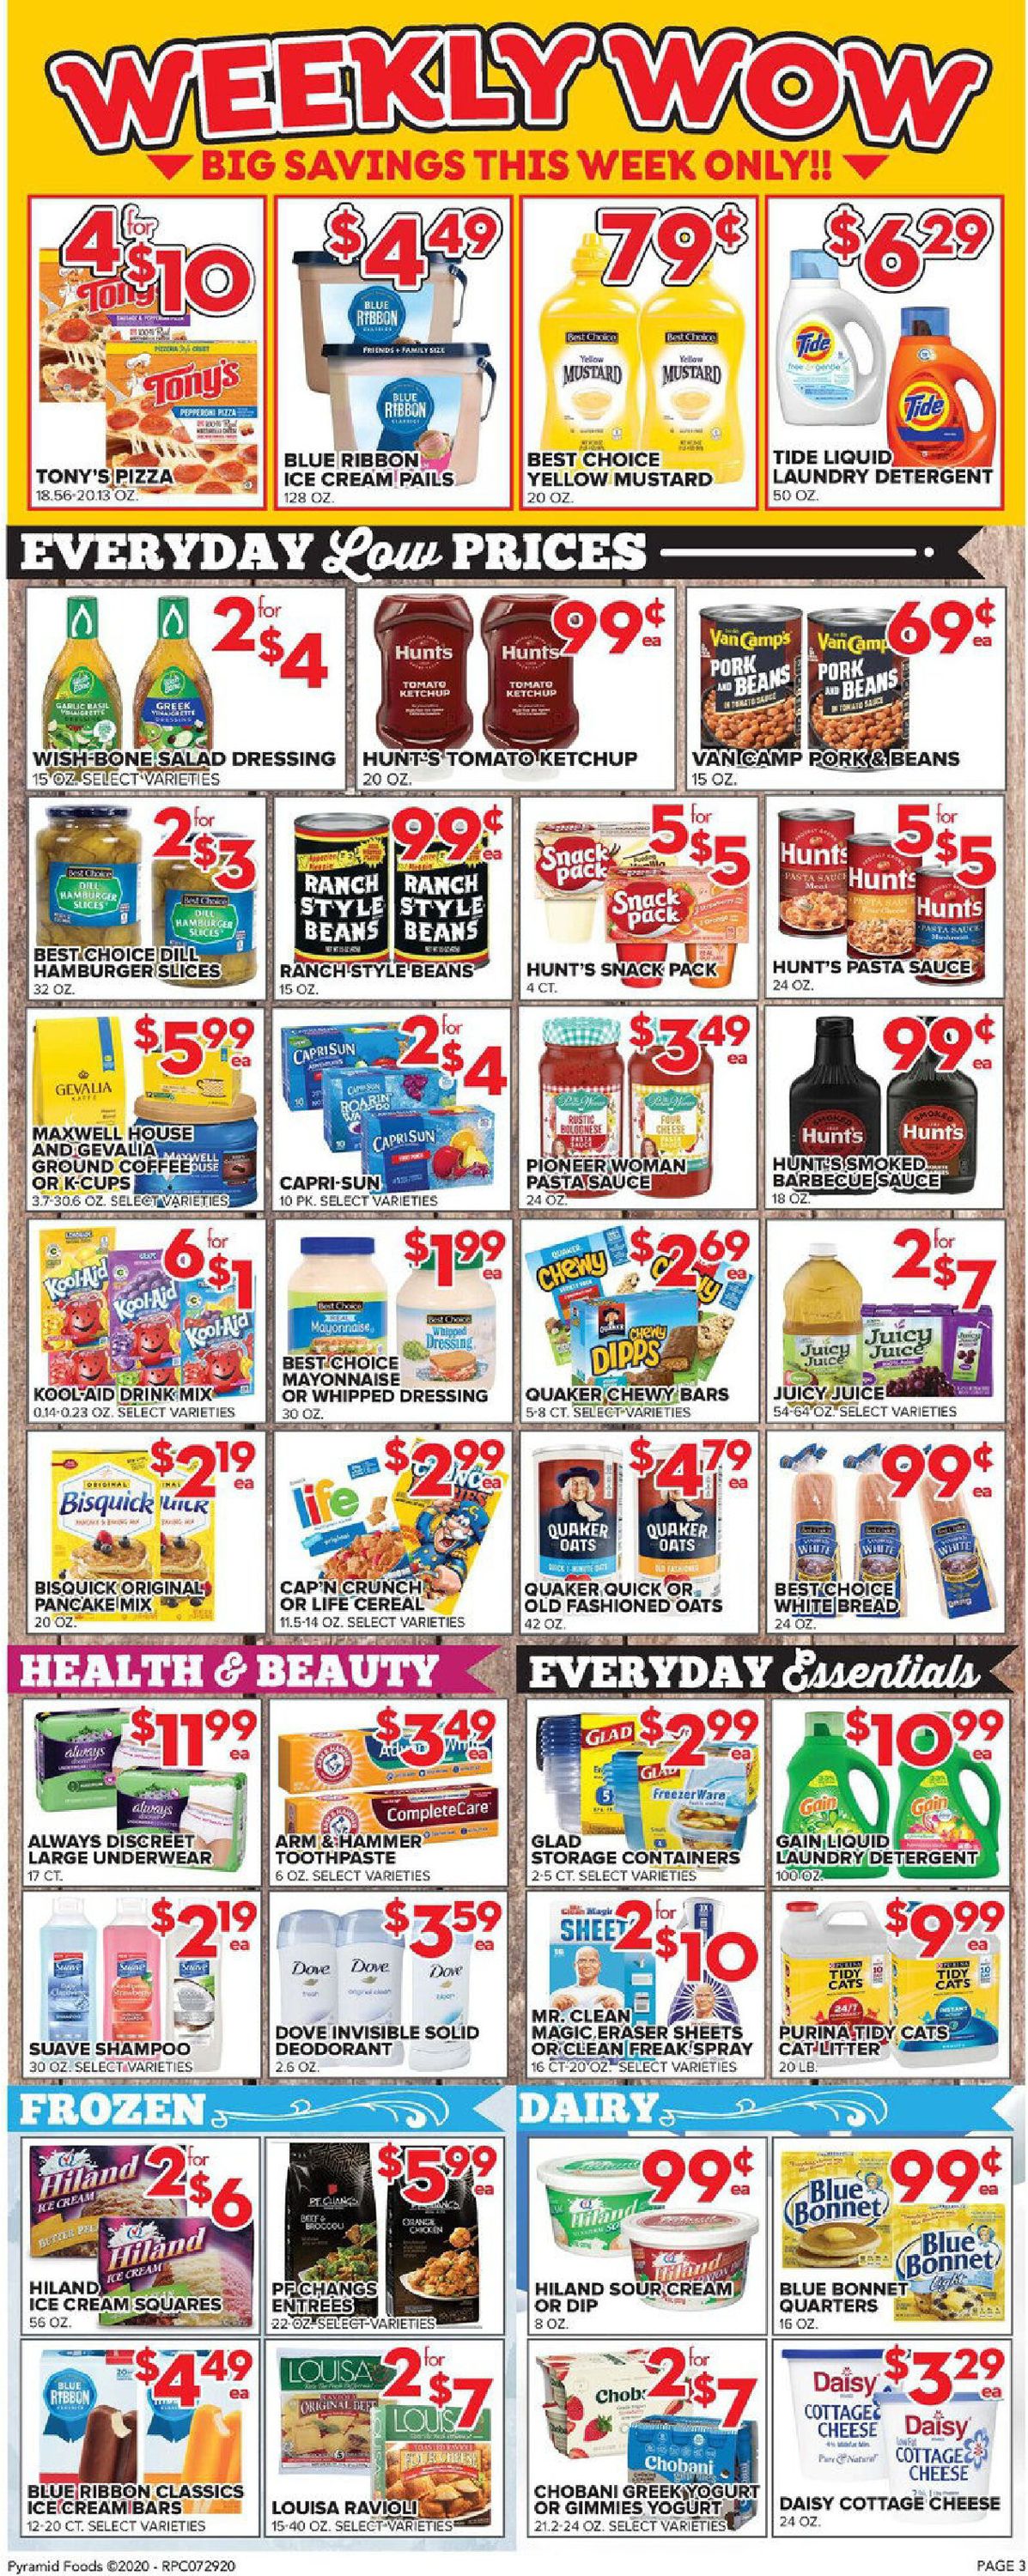 Price Cutter Weekly Ad Circular - valid 07/29-08/04/2020 (Page 3)